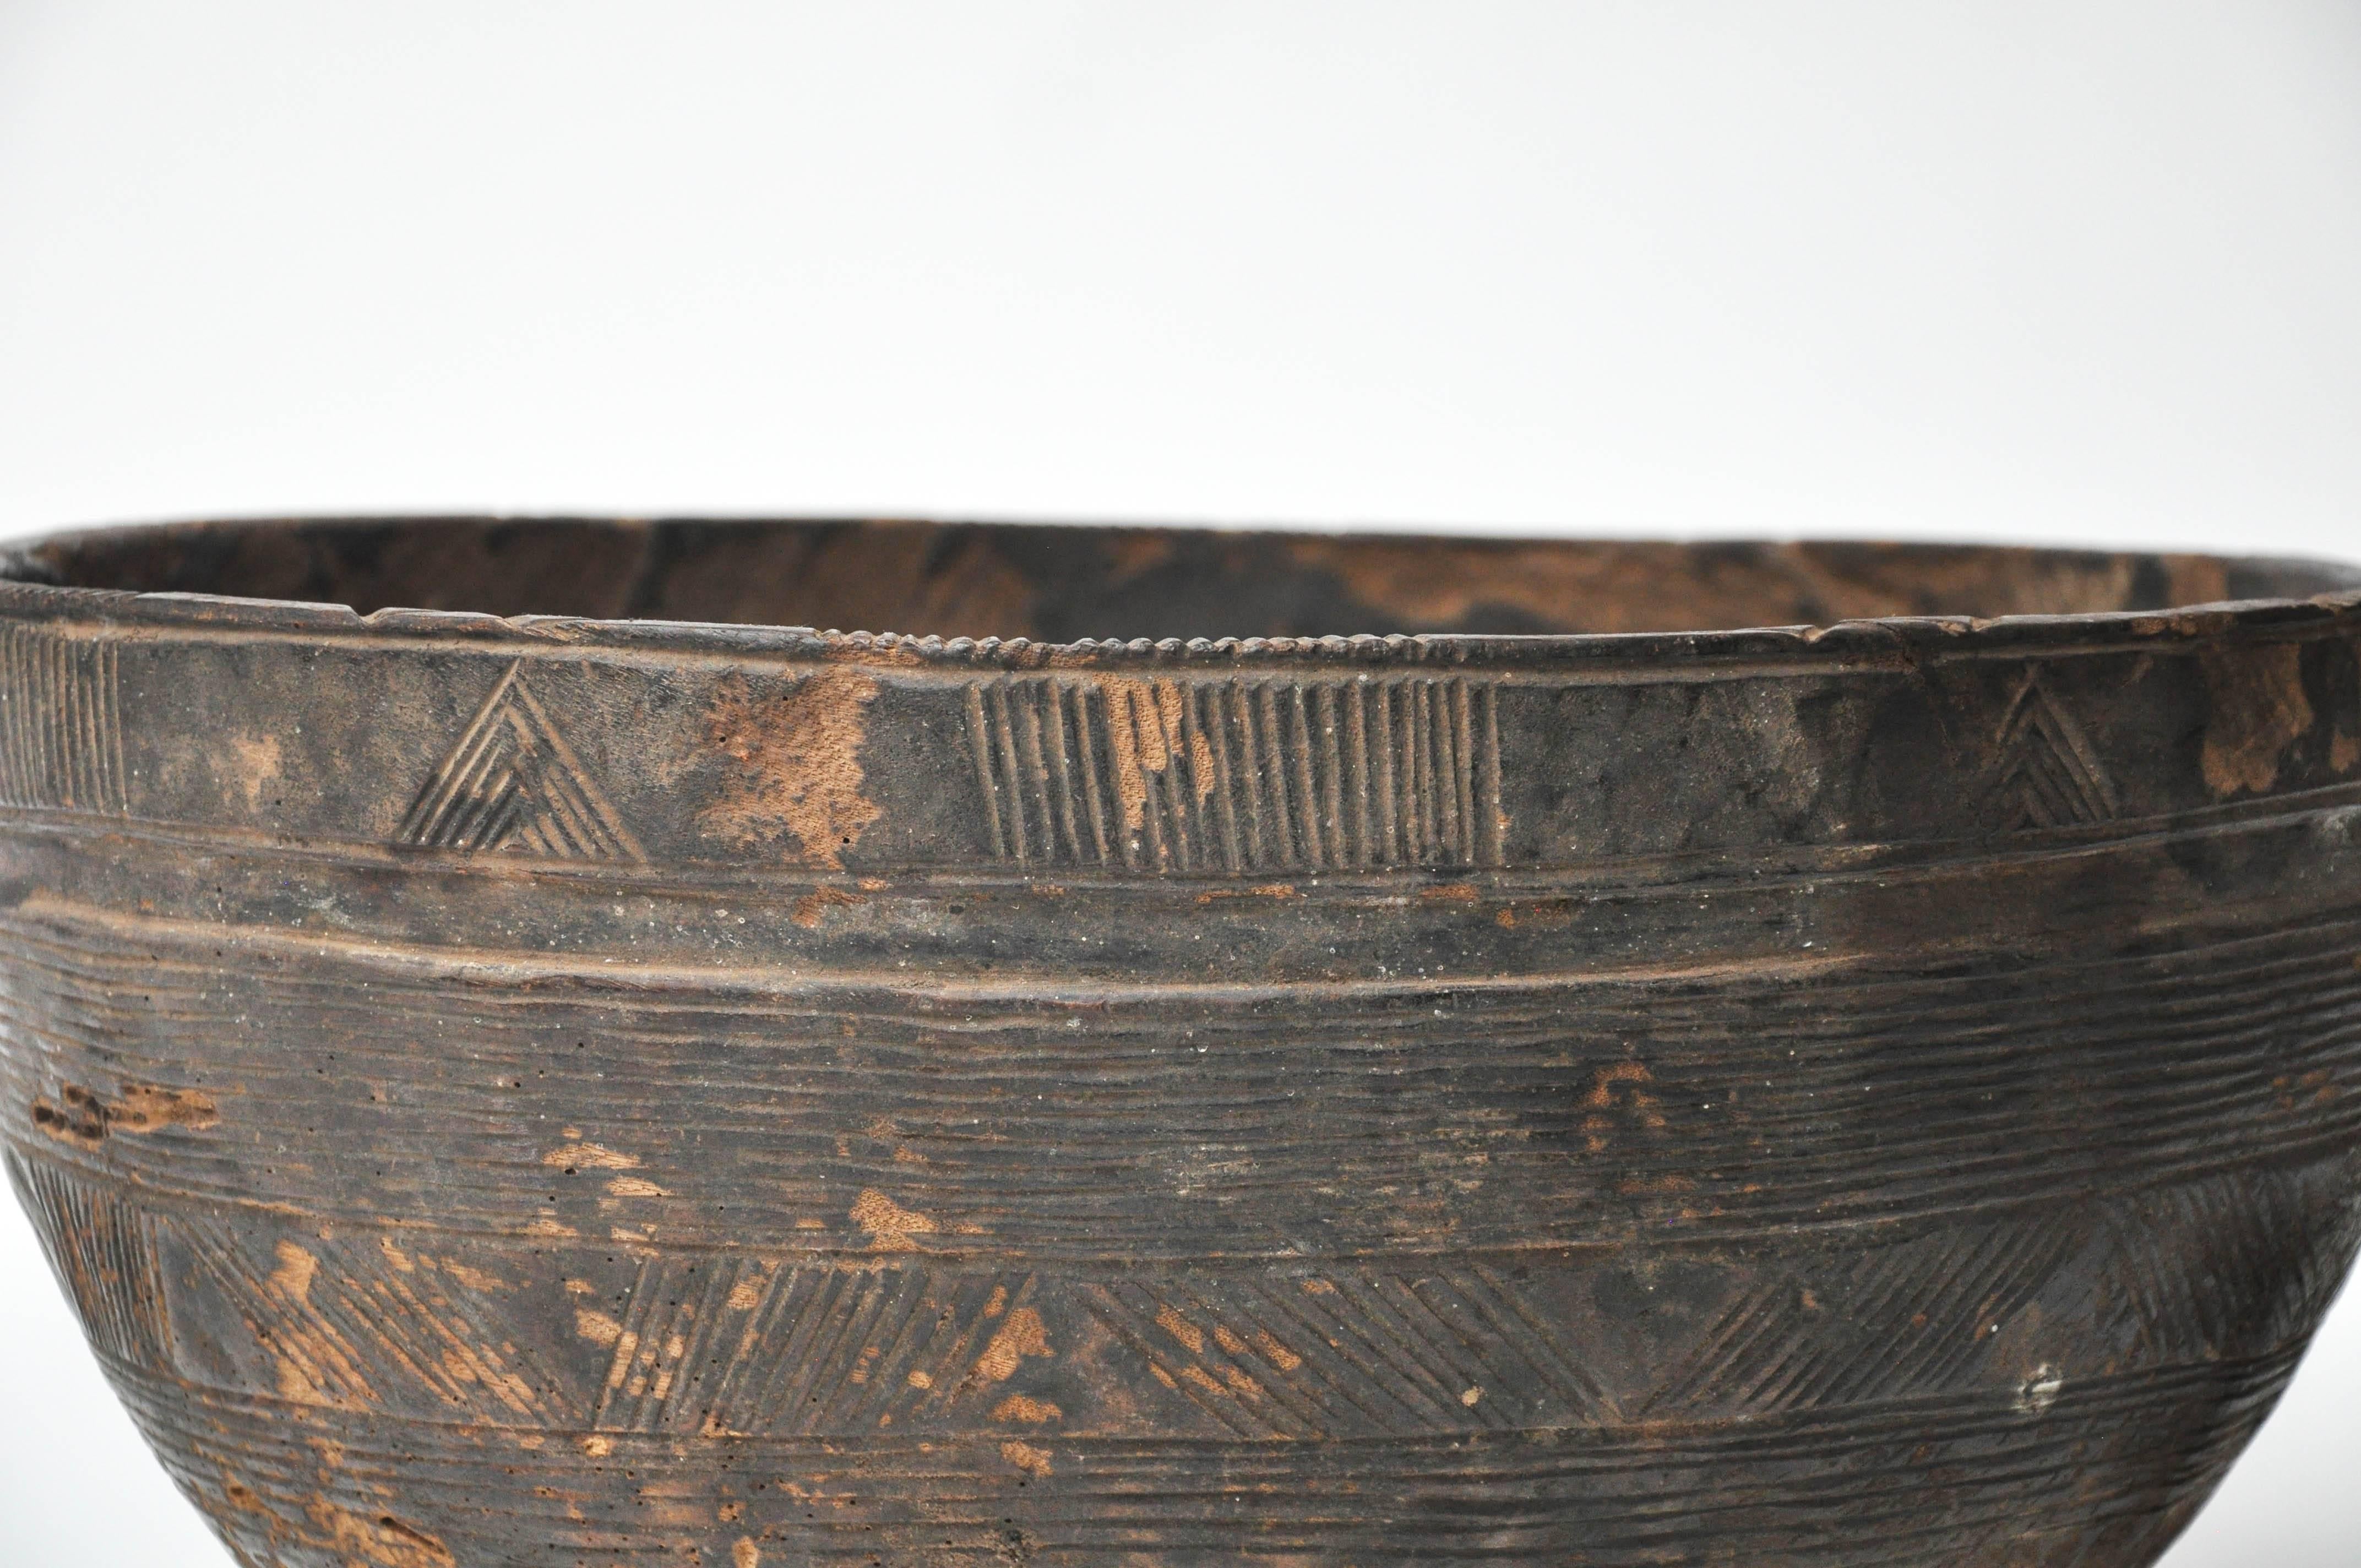 Beautifully hand carved Wood Bowl with inticate detail.